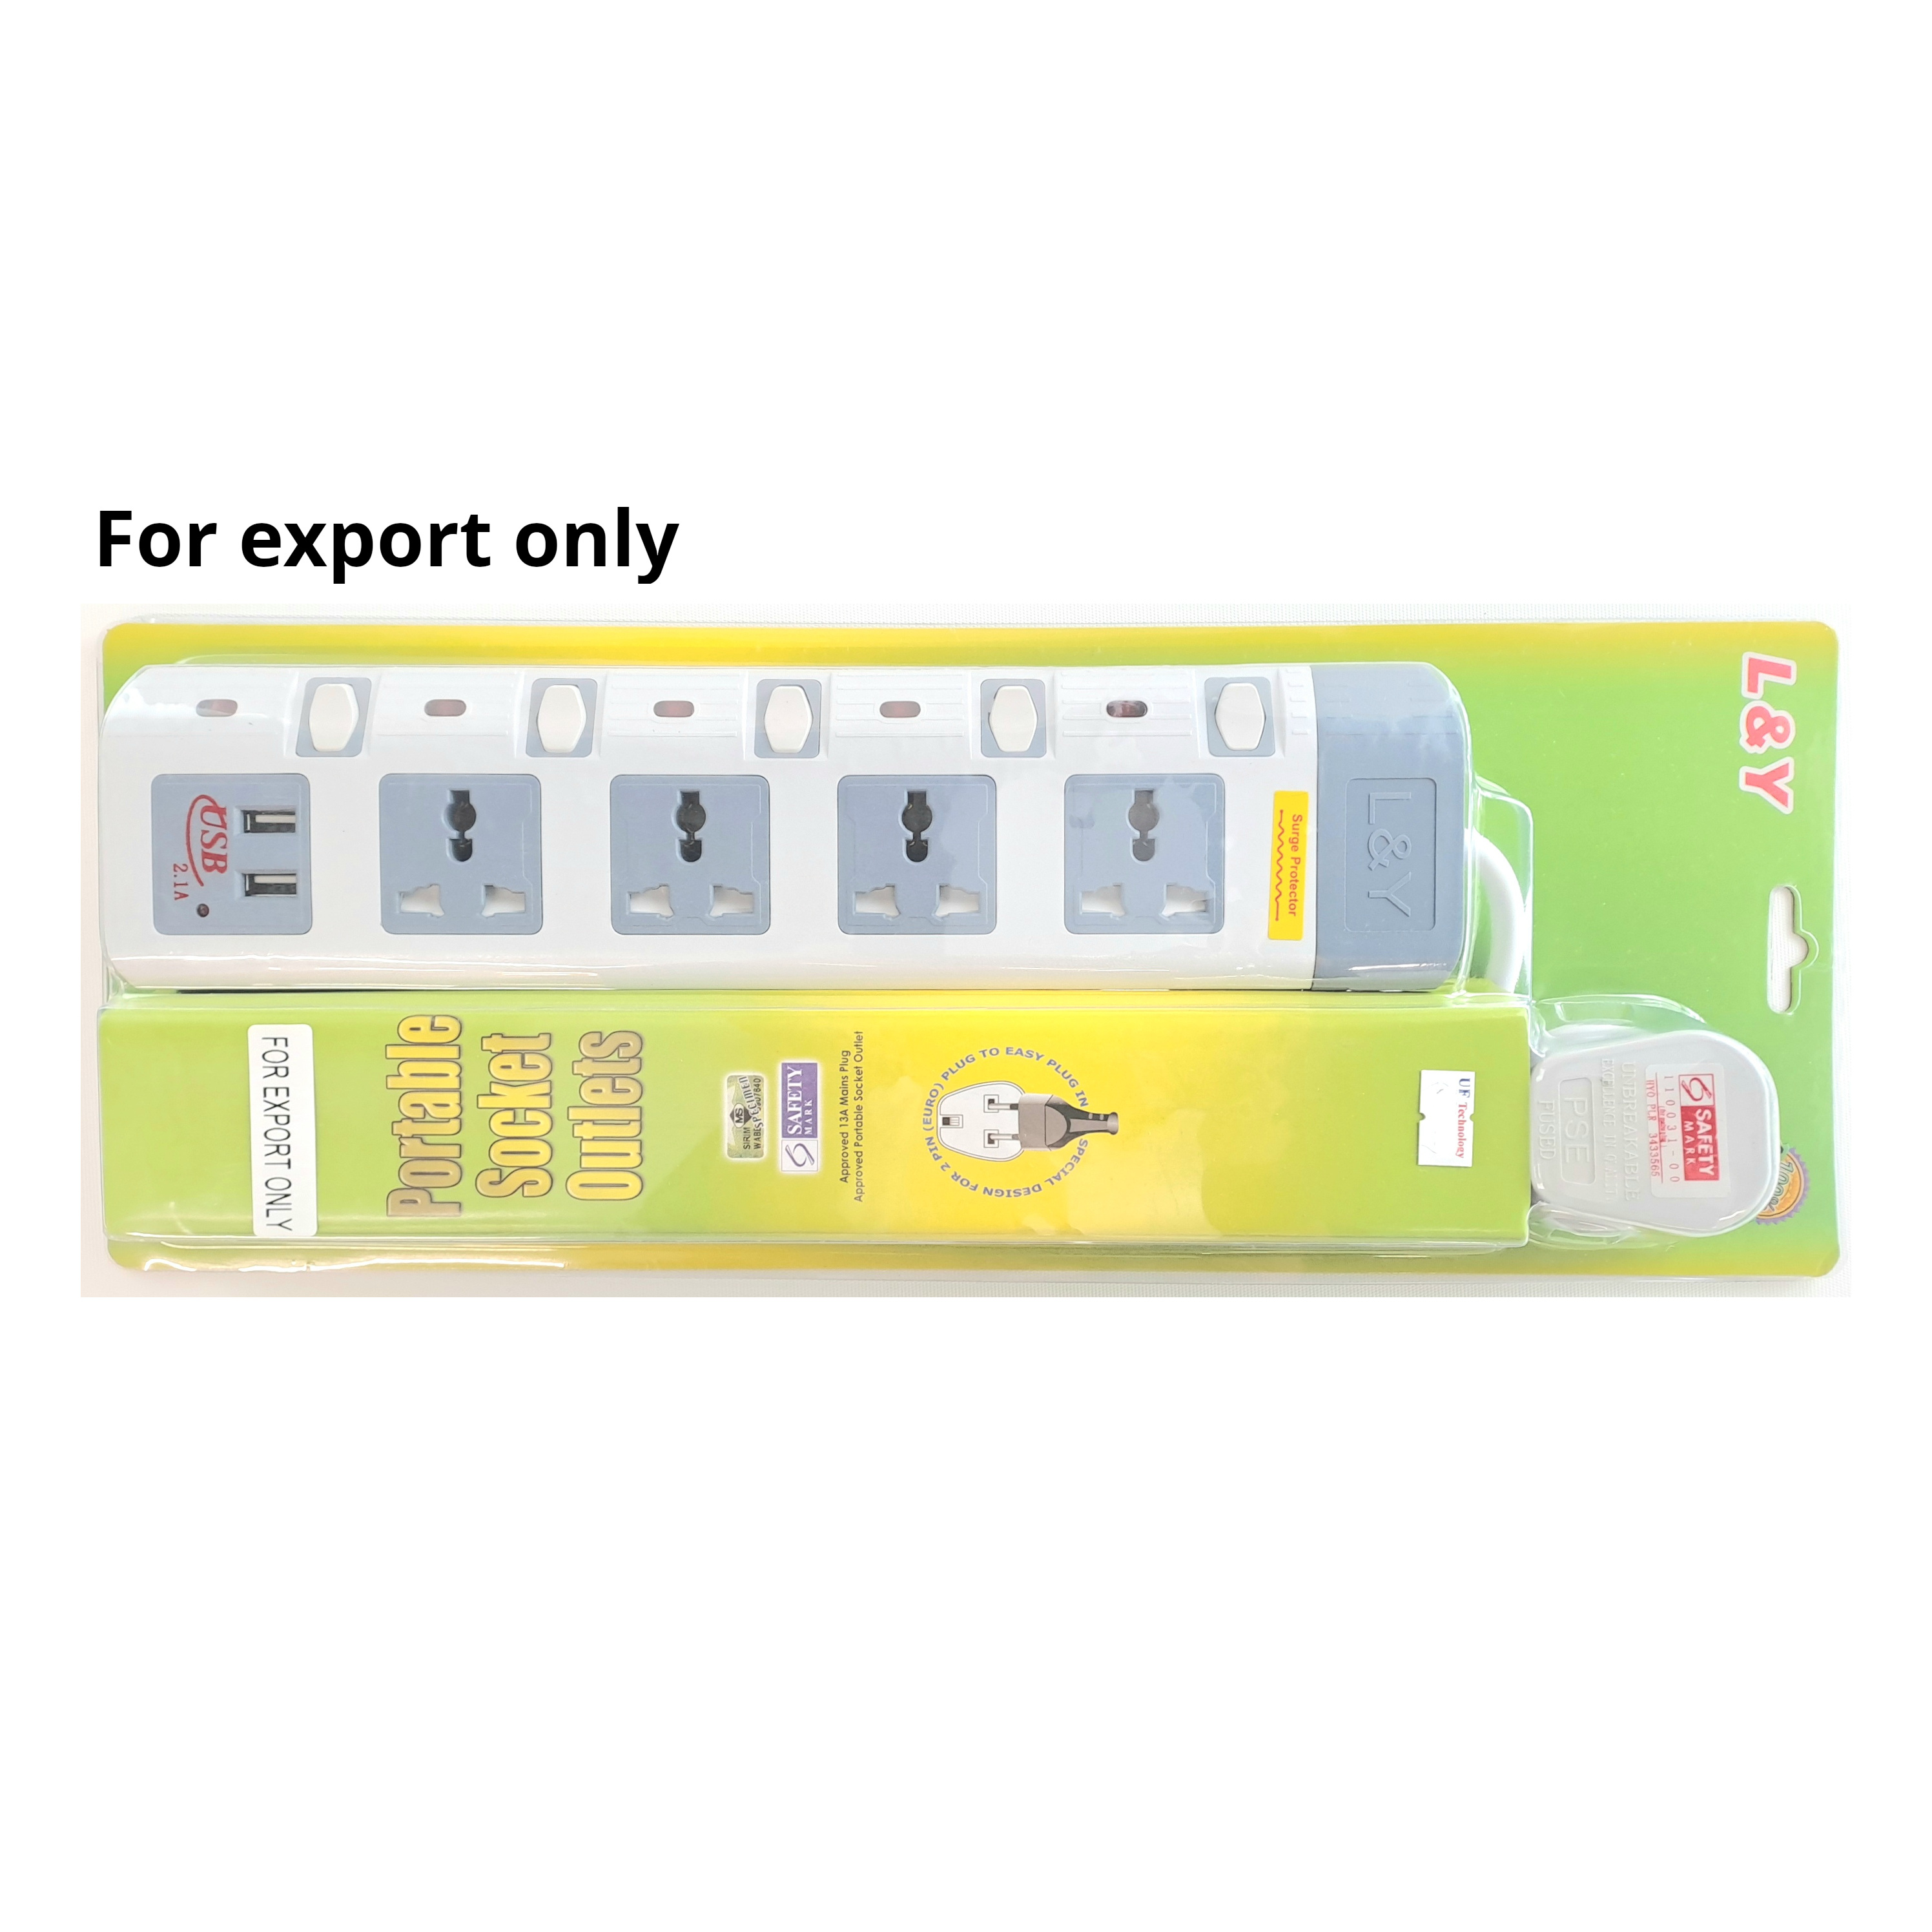 L&Y 4 Way 3pin Multi Socket Outlet with 2xUSB-3M (for export only)